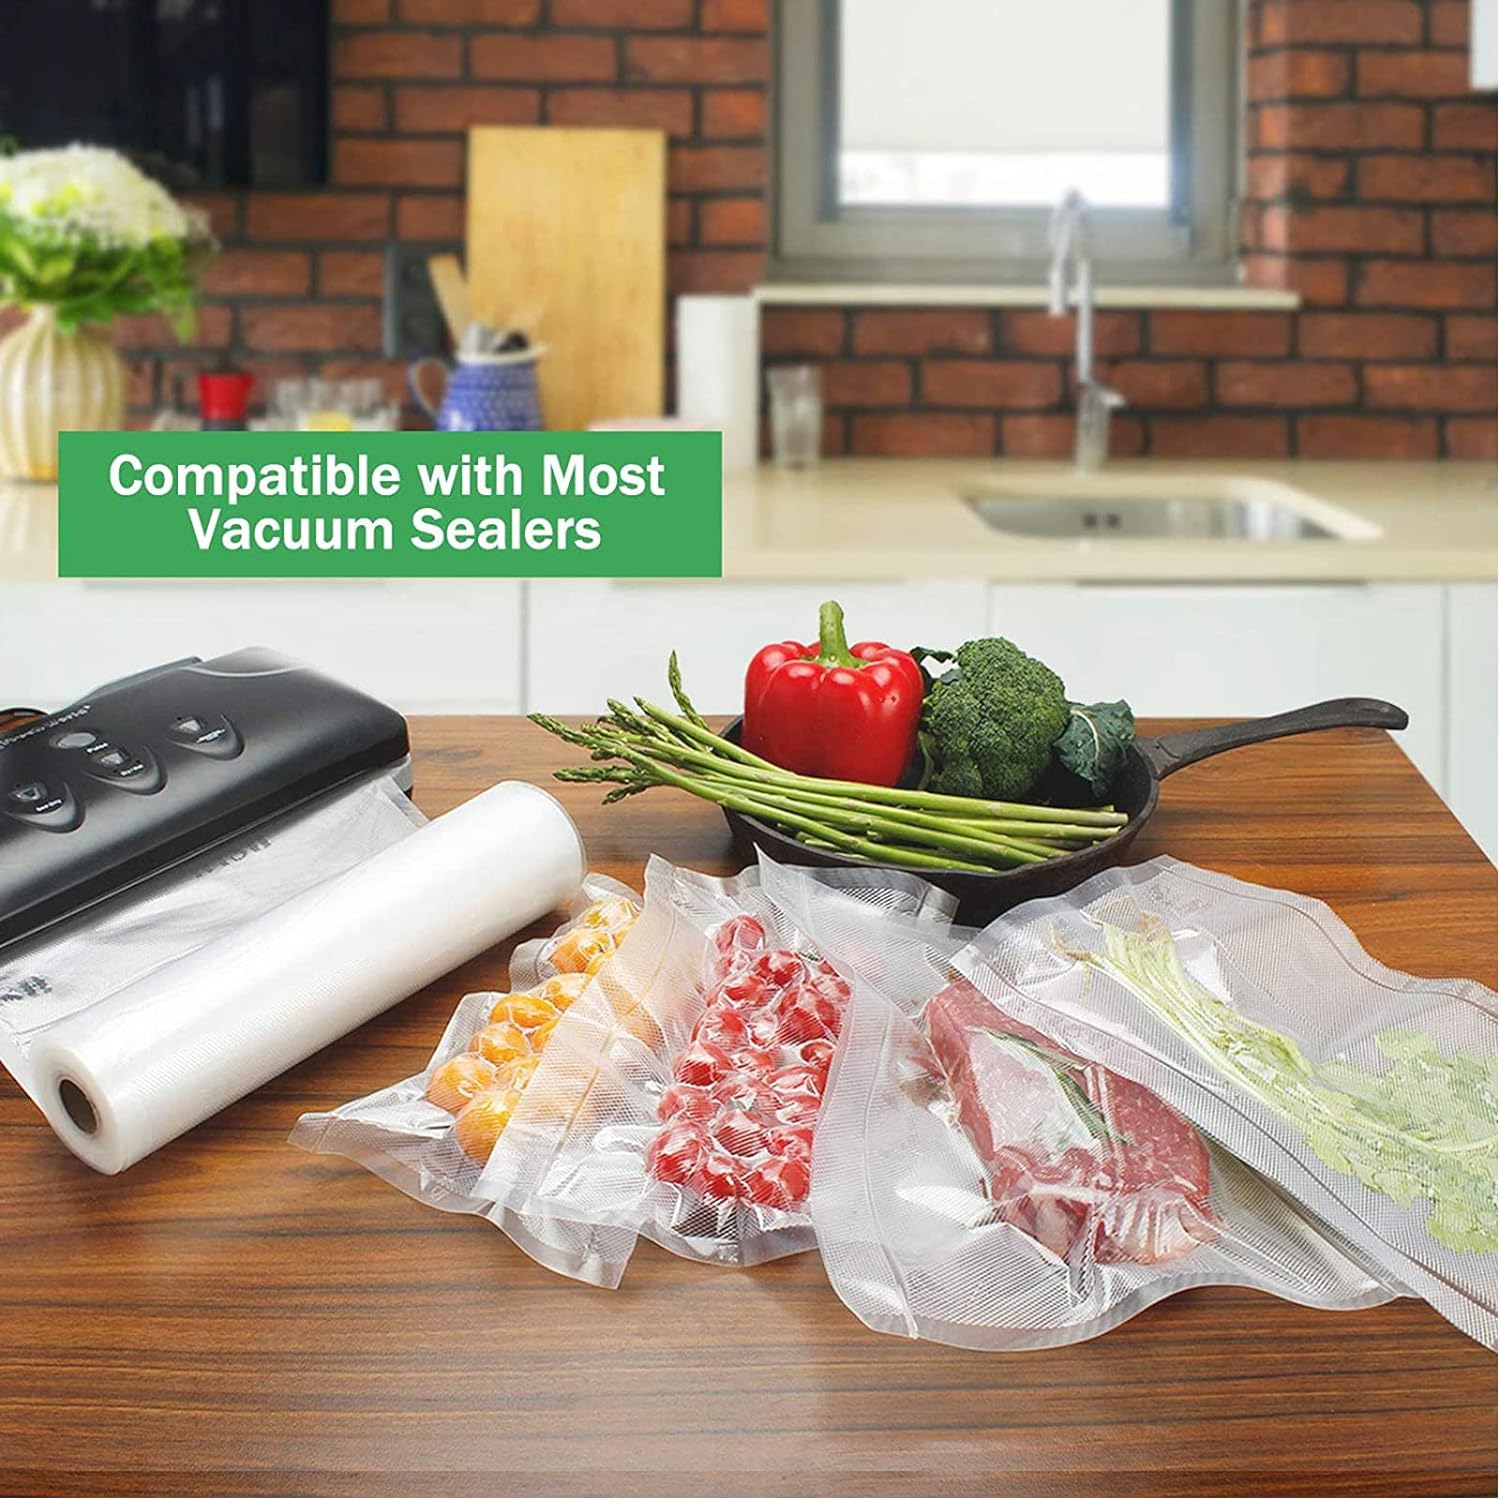 Vacuum Sealer Bags for Food, Vacuum Storage Bags Food Sealer Rolls Sealerbag for Food Saver Work with all Vacuum Sealer Machine Great for vac storage or Sous Vide (4 Roll, 2 * 20x500cm, 2 * 28x500cm)